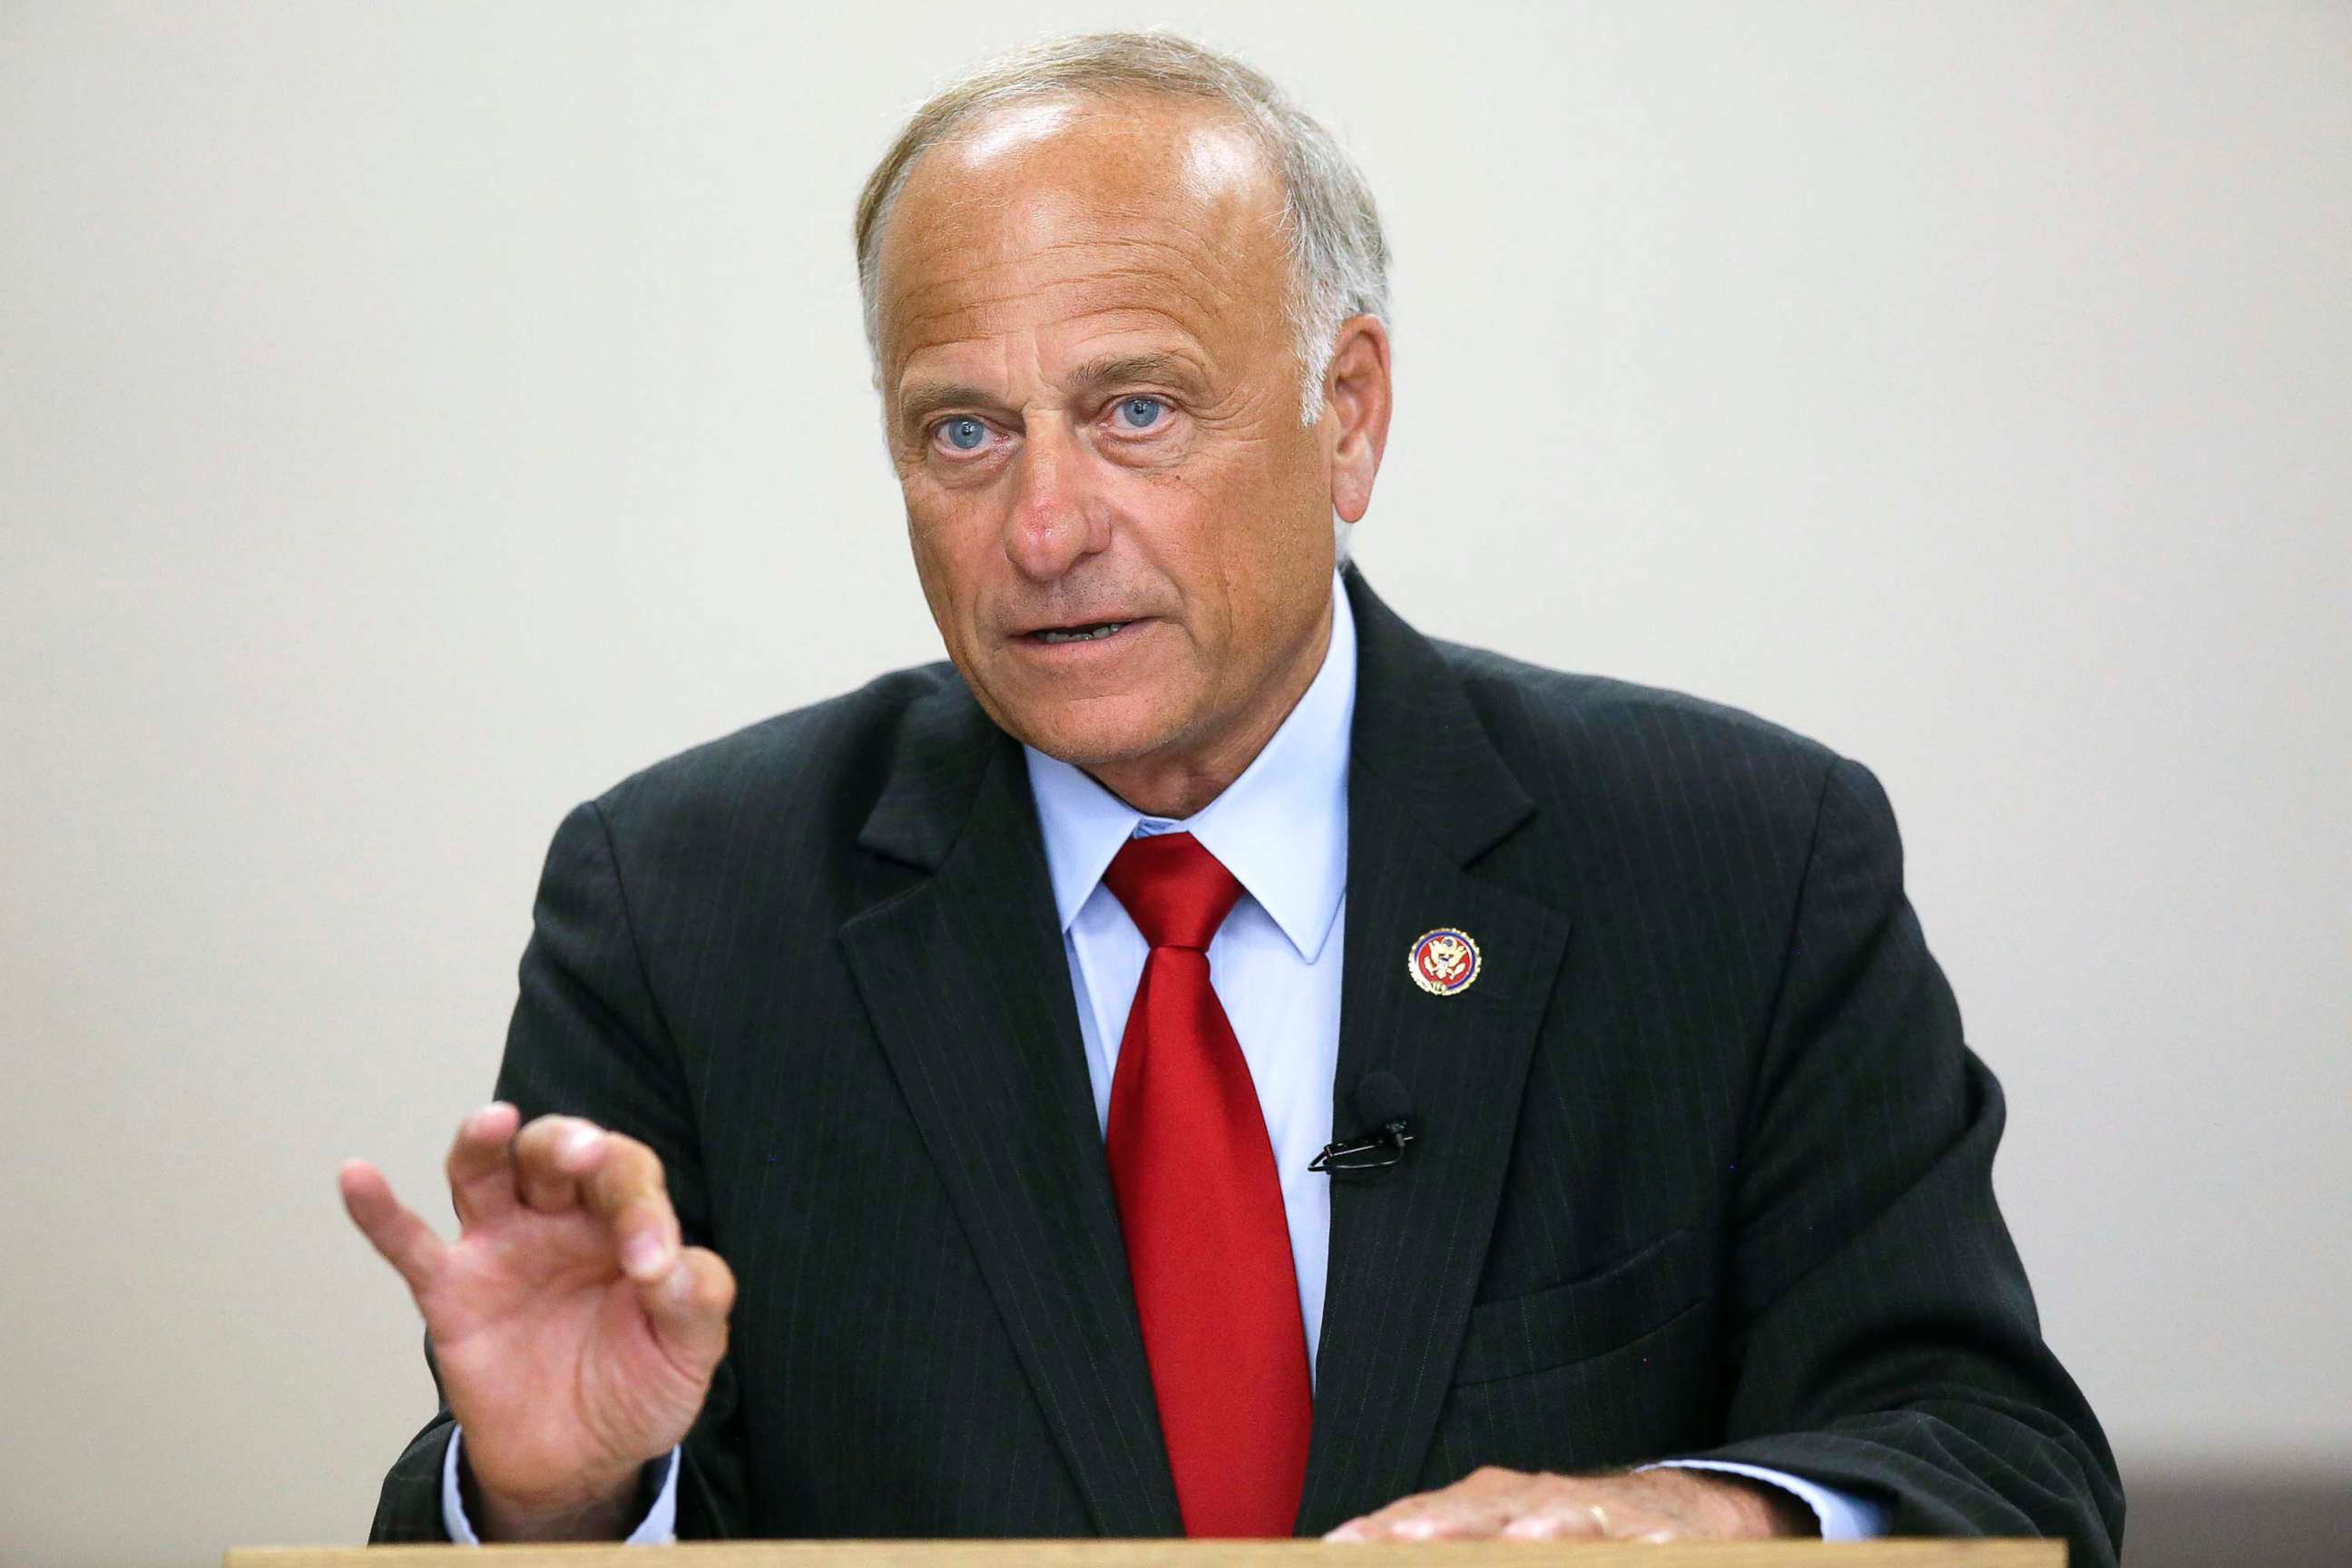 PHOTO: Rep. Steve King (R-IA) speaks during a town hall meeting at the Ericson Public Library, Aug. 13, 2019, in Boone, Iowa.